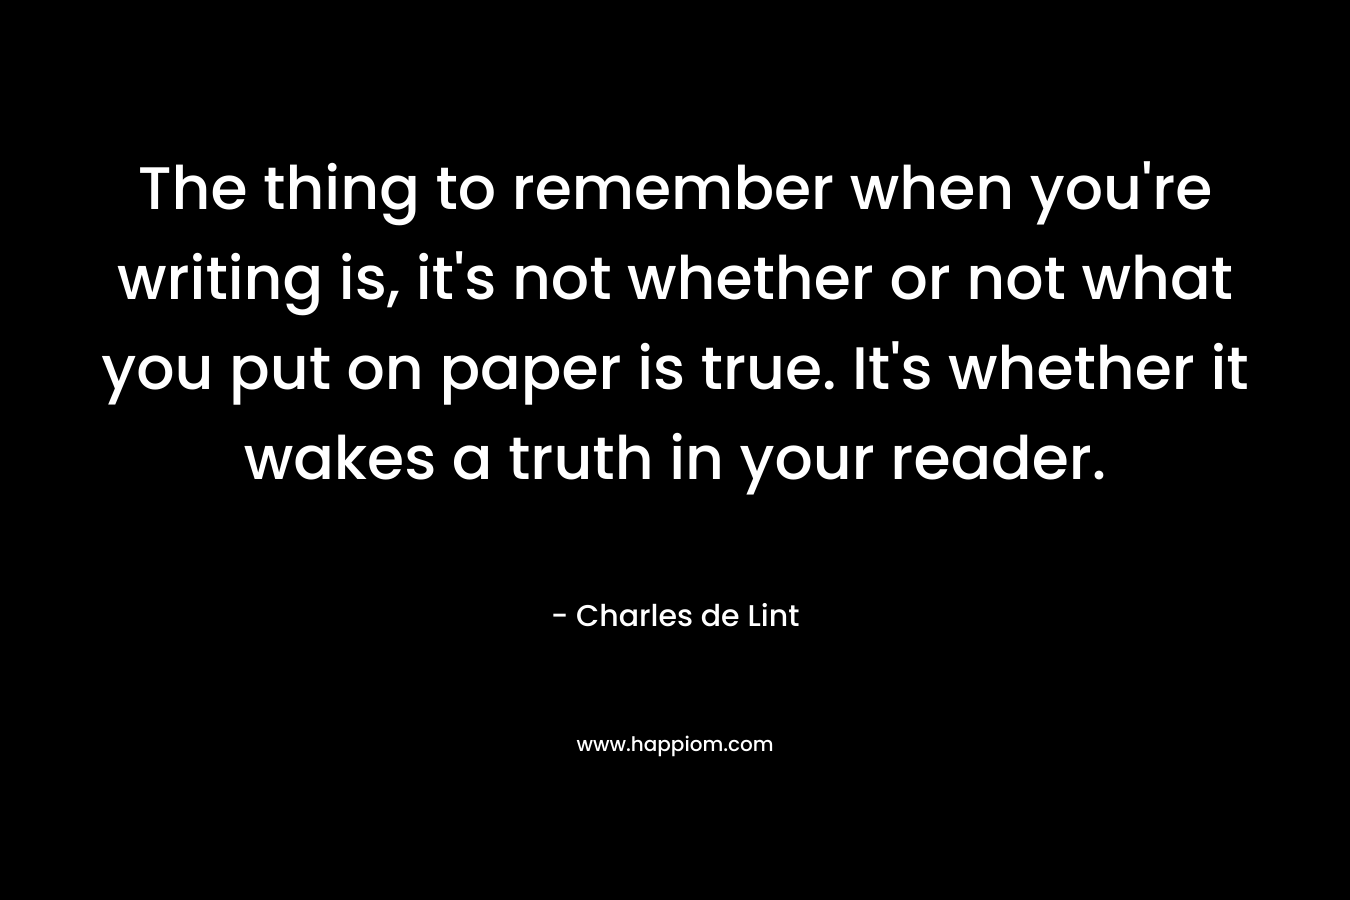 The thing to remember when you're writing is, it's not whether or not what you put on paper is true. It's whether it wakes a truth in your reader.